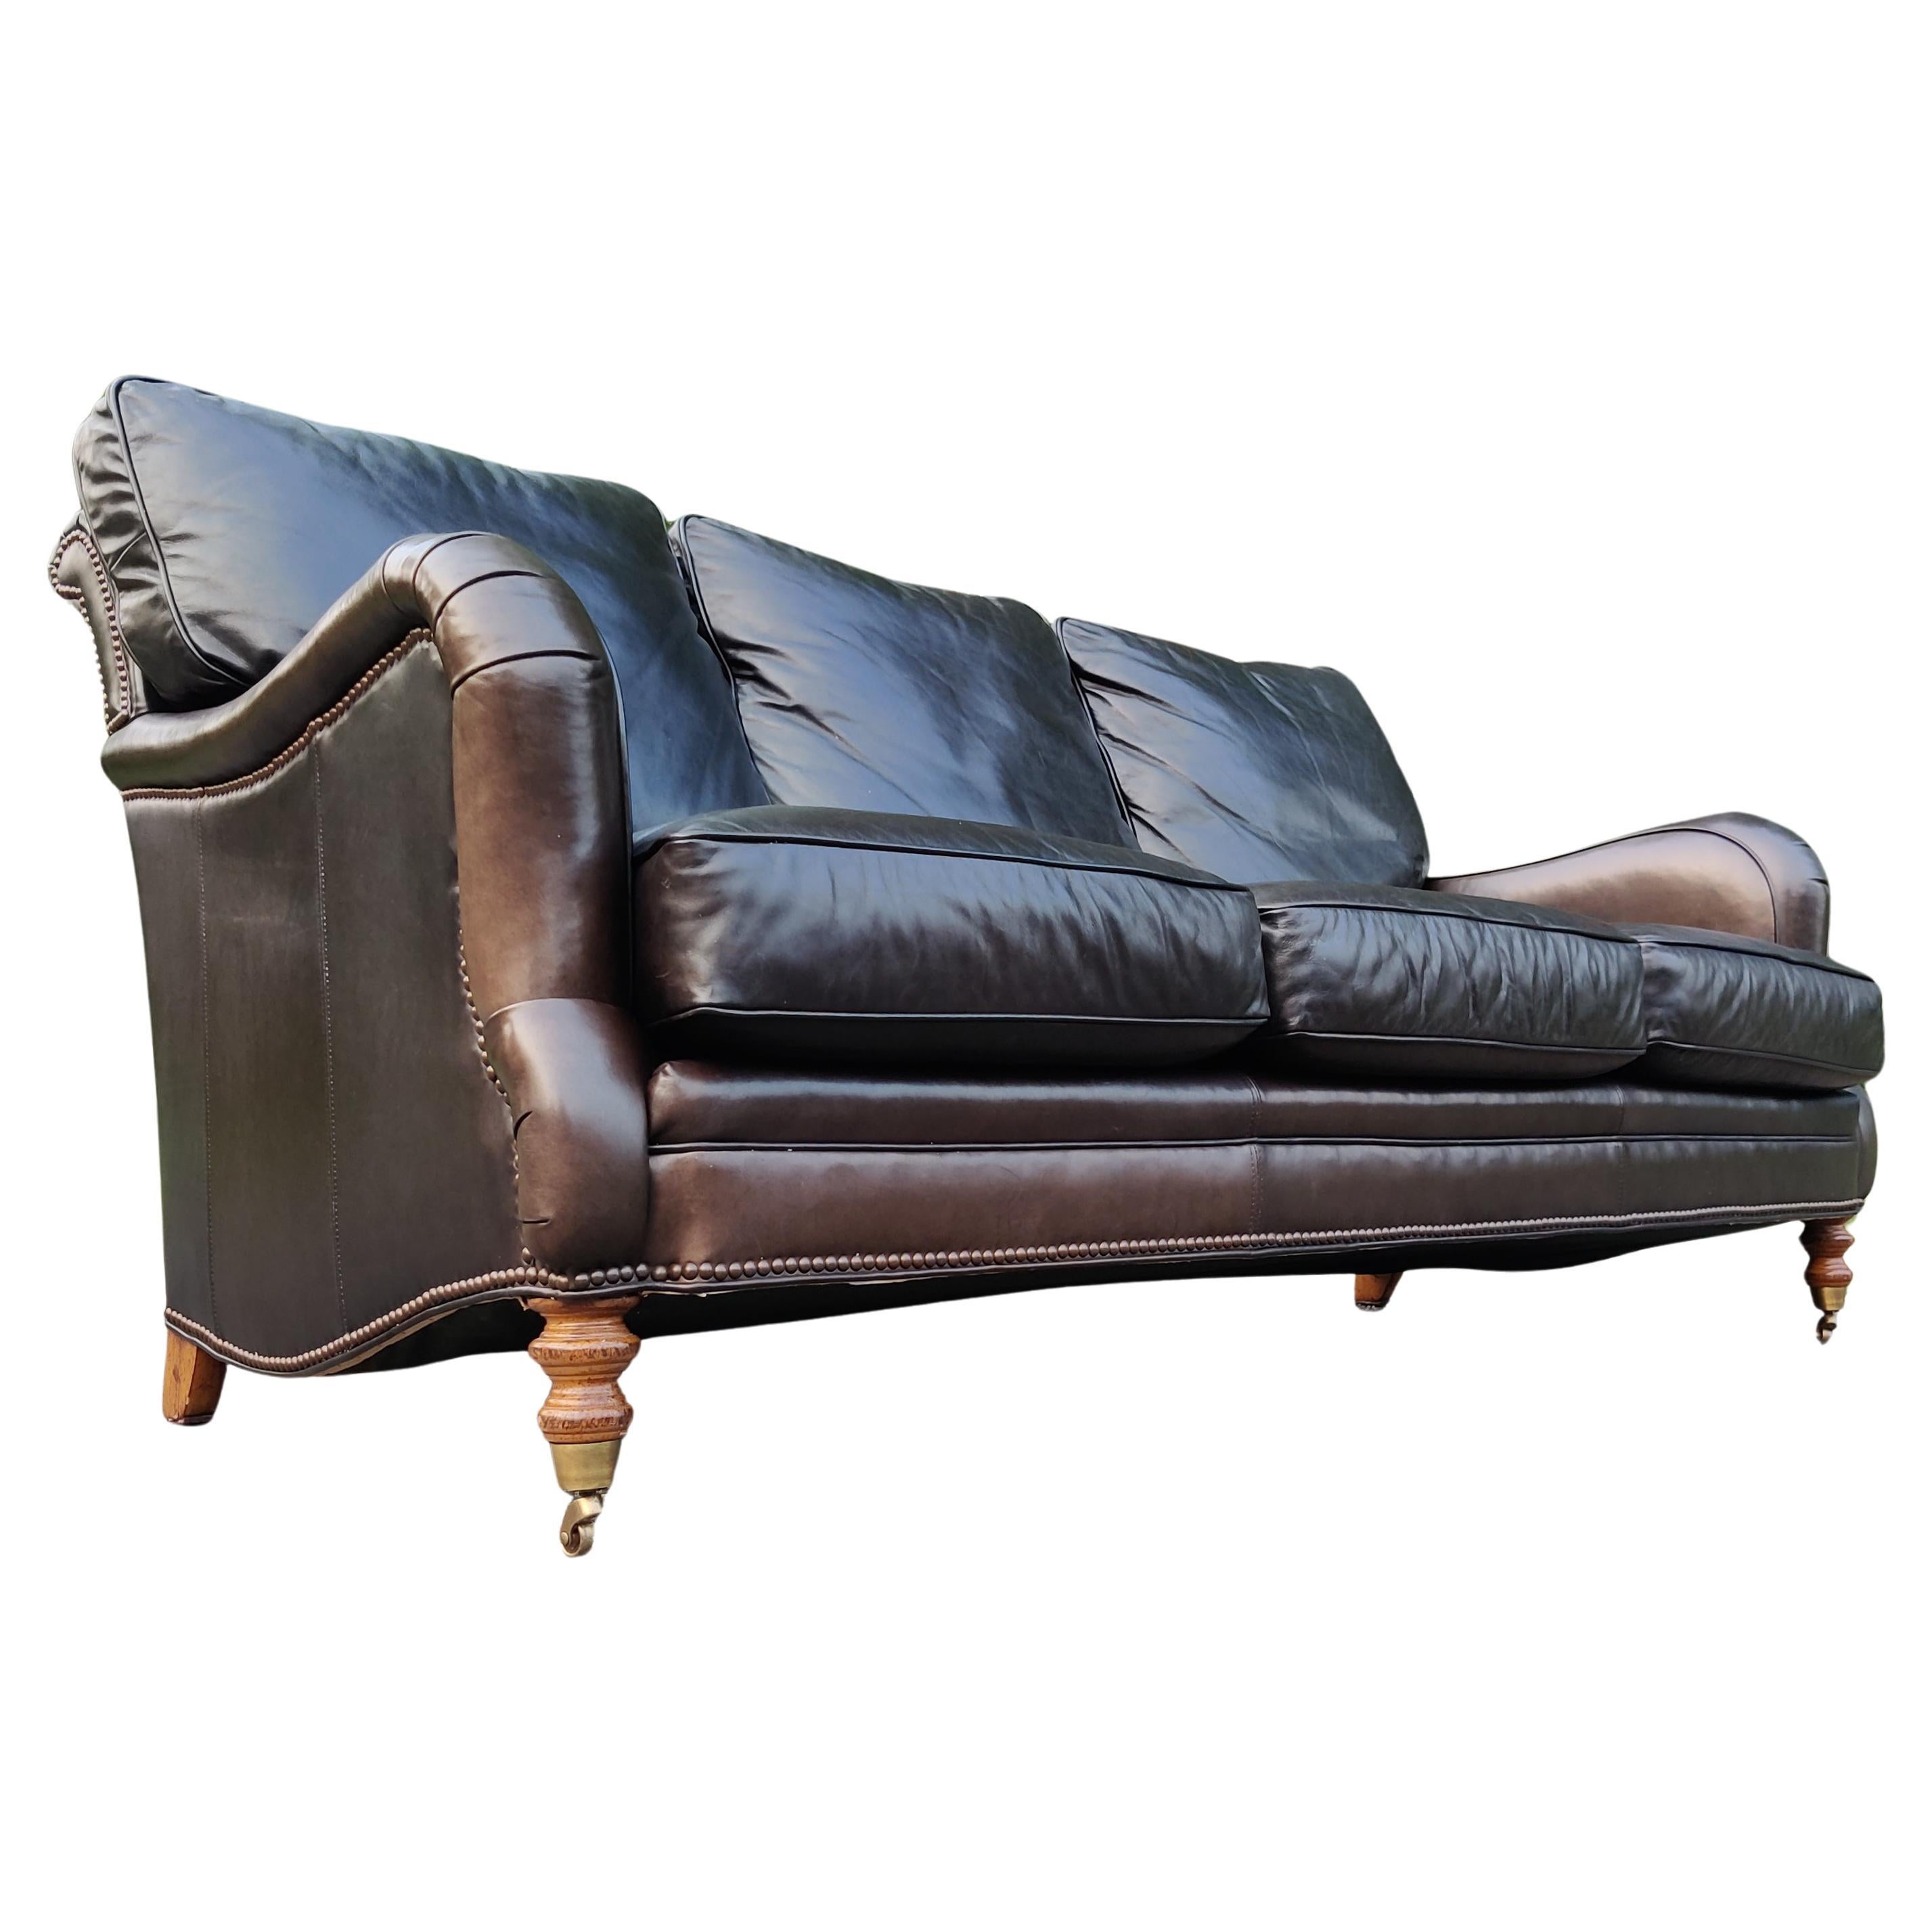 English Regency 3-Seater 'Espresso' Leather & Brass Sofa, Style of George Smith